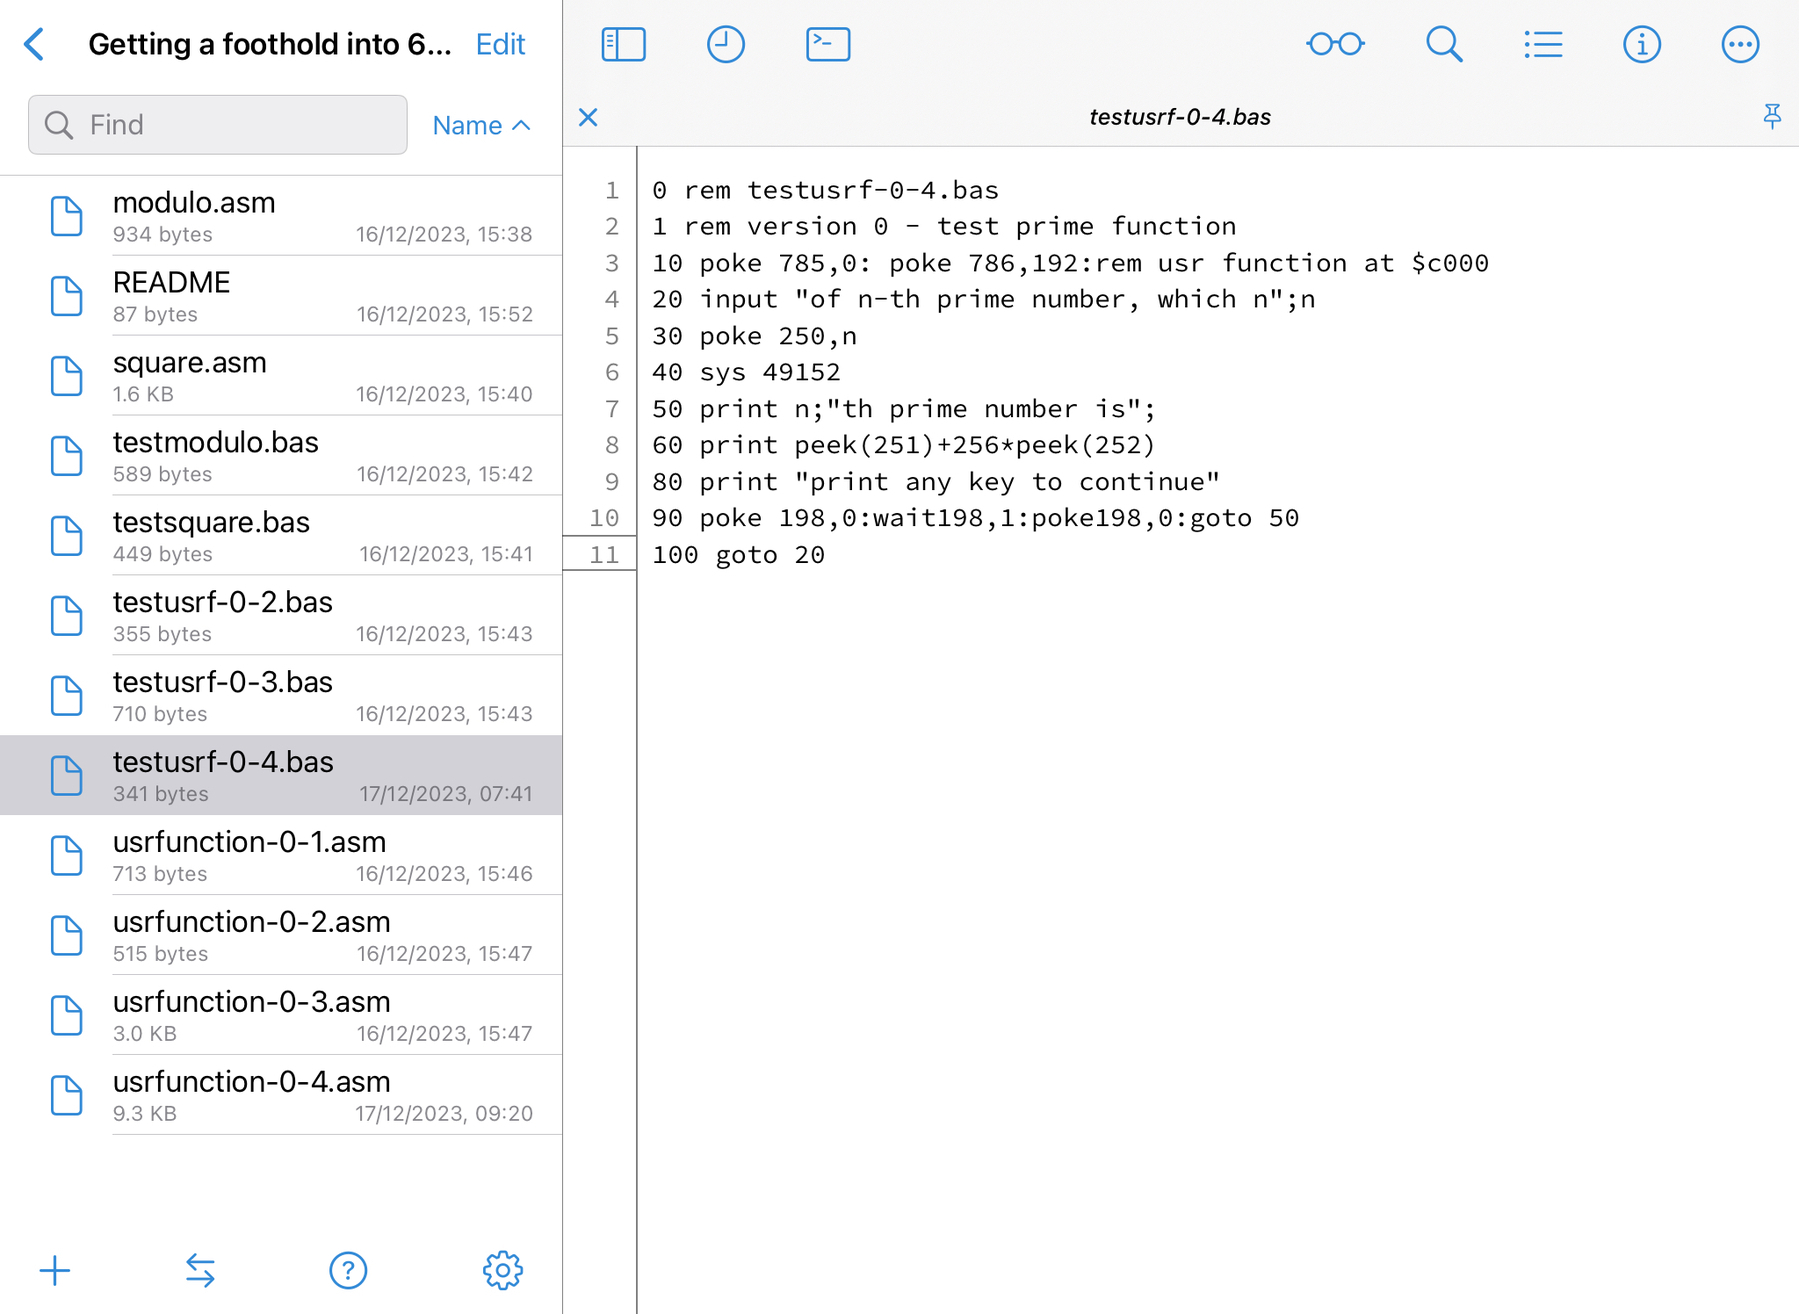 screenshot of iPad, showing the text of a C64 Basic program